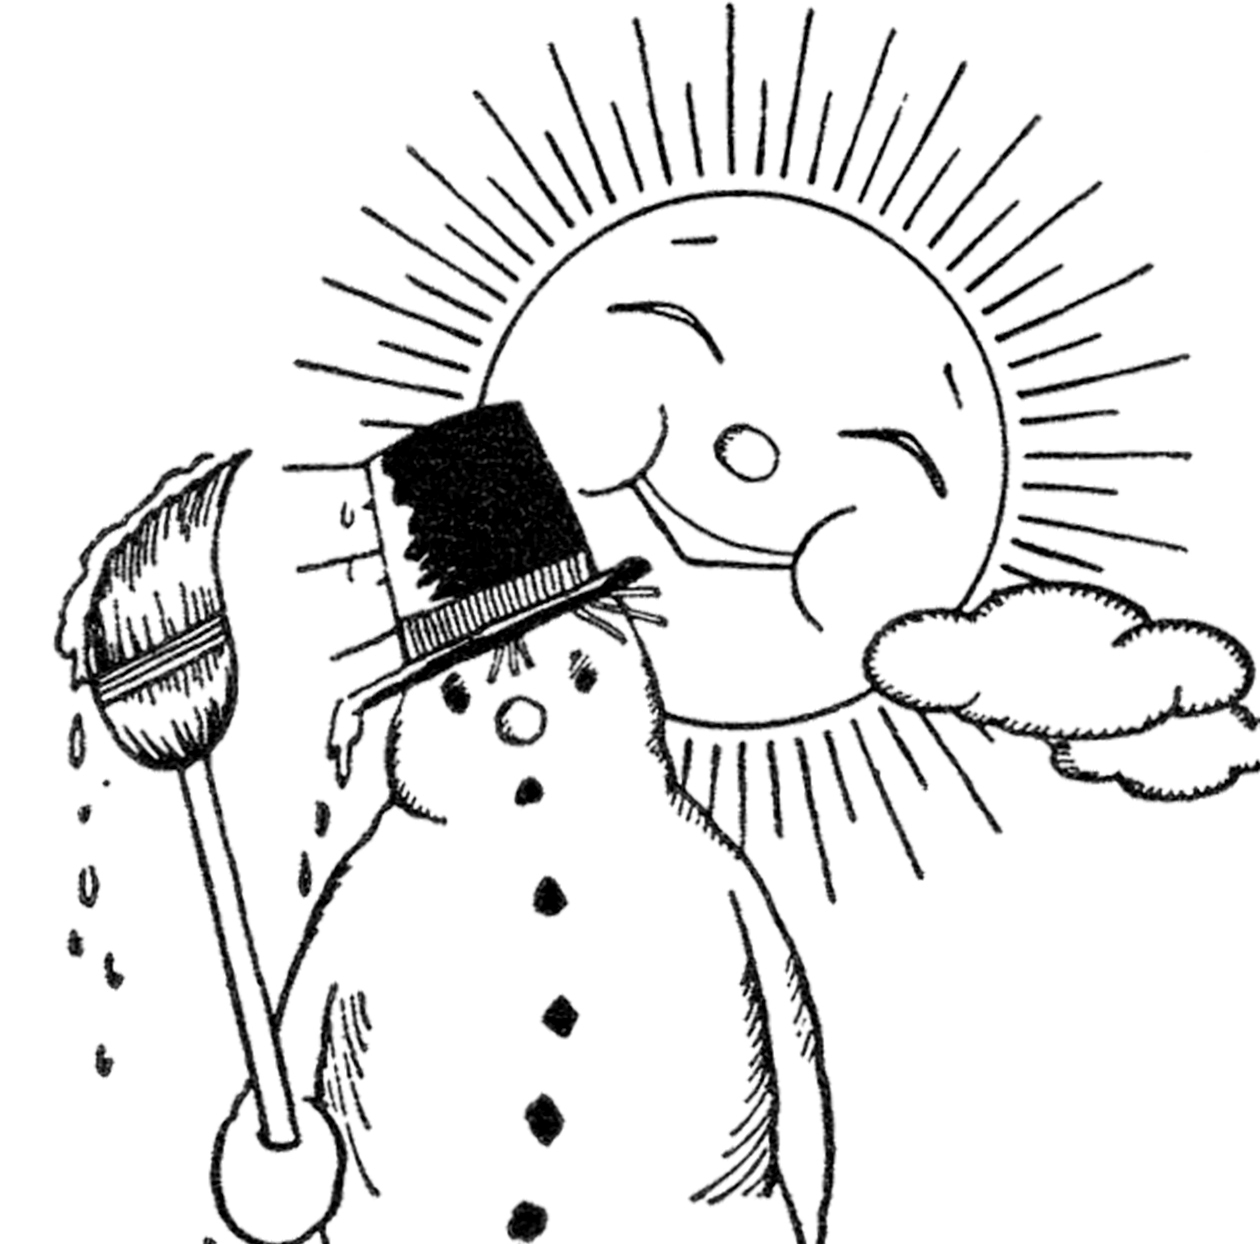 Cute Melting Snowman Image    The Graphics Fairy